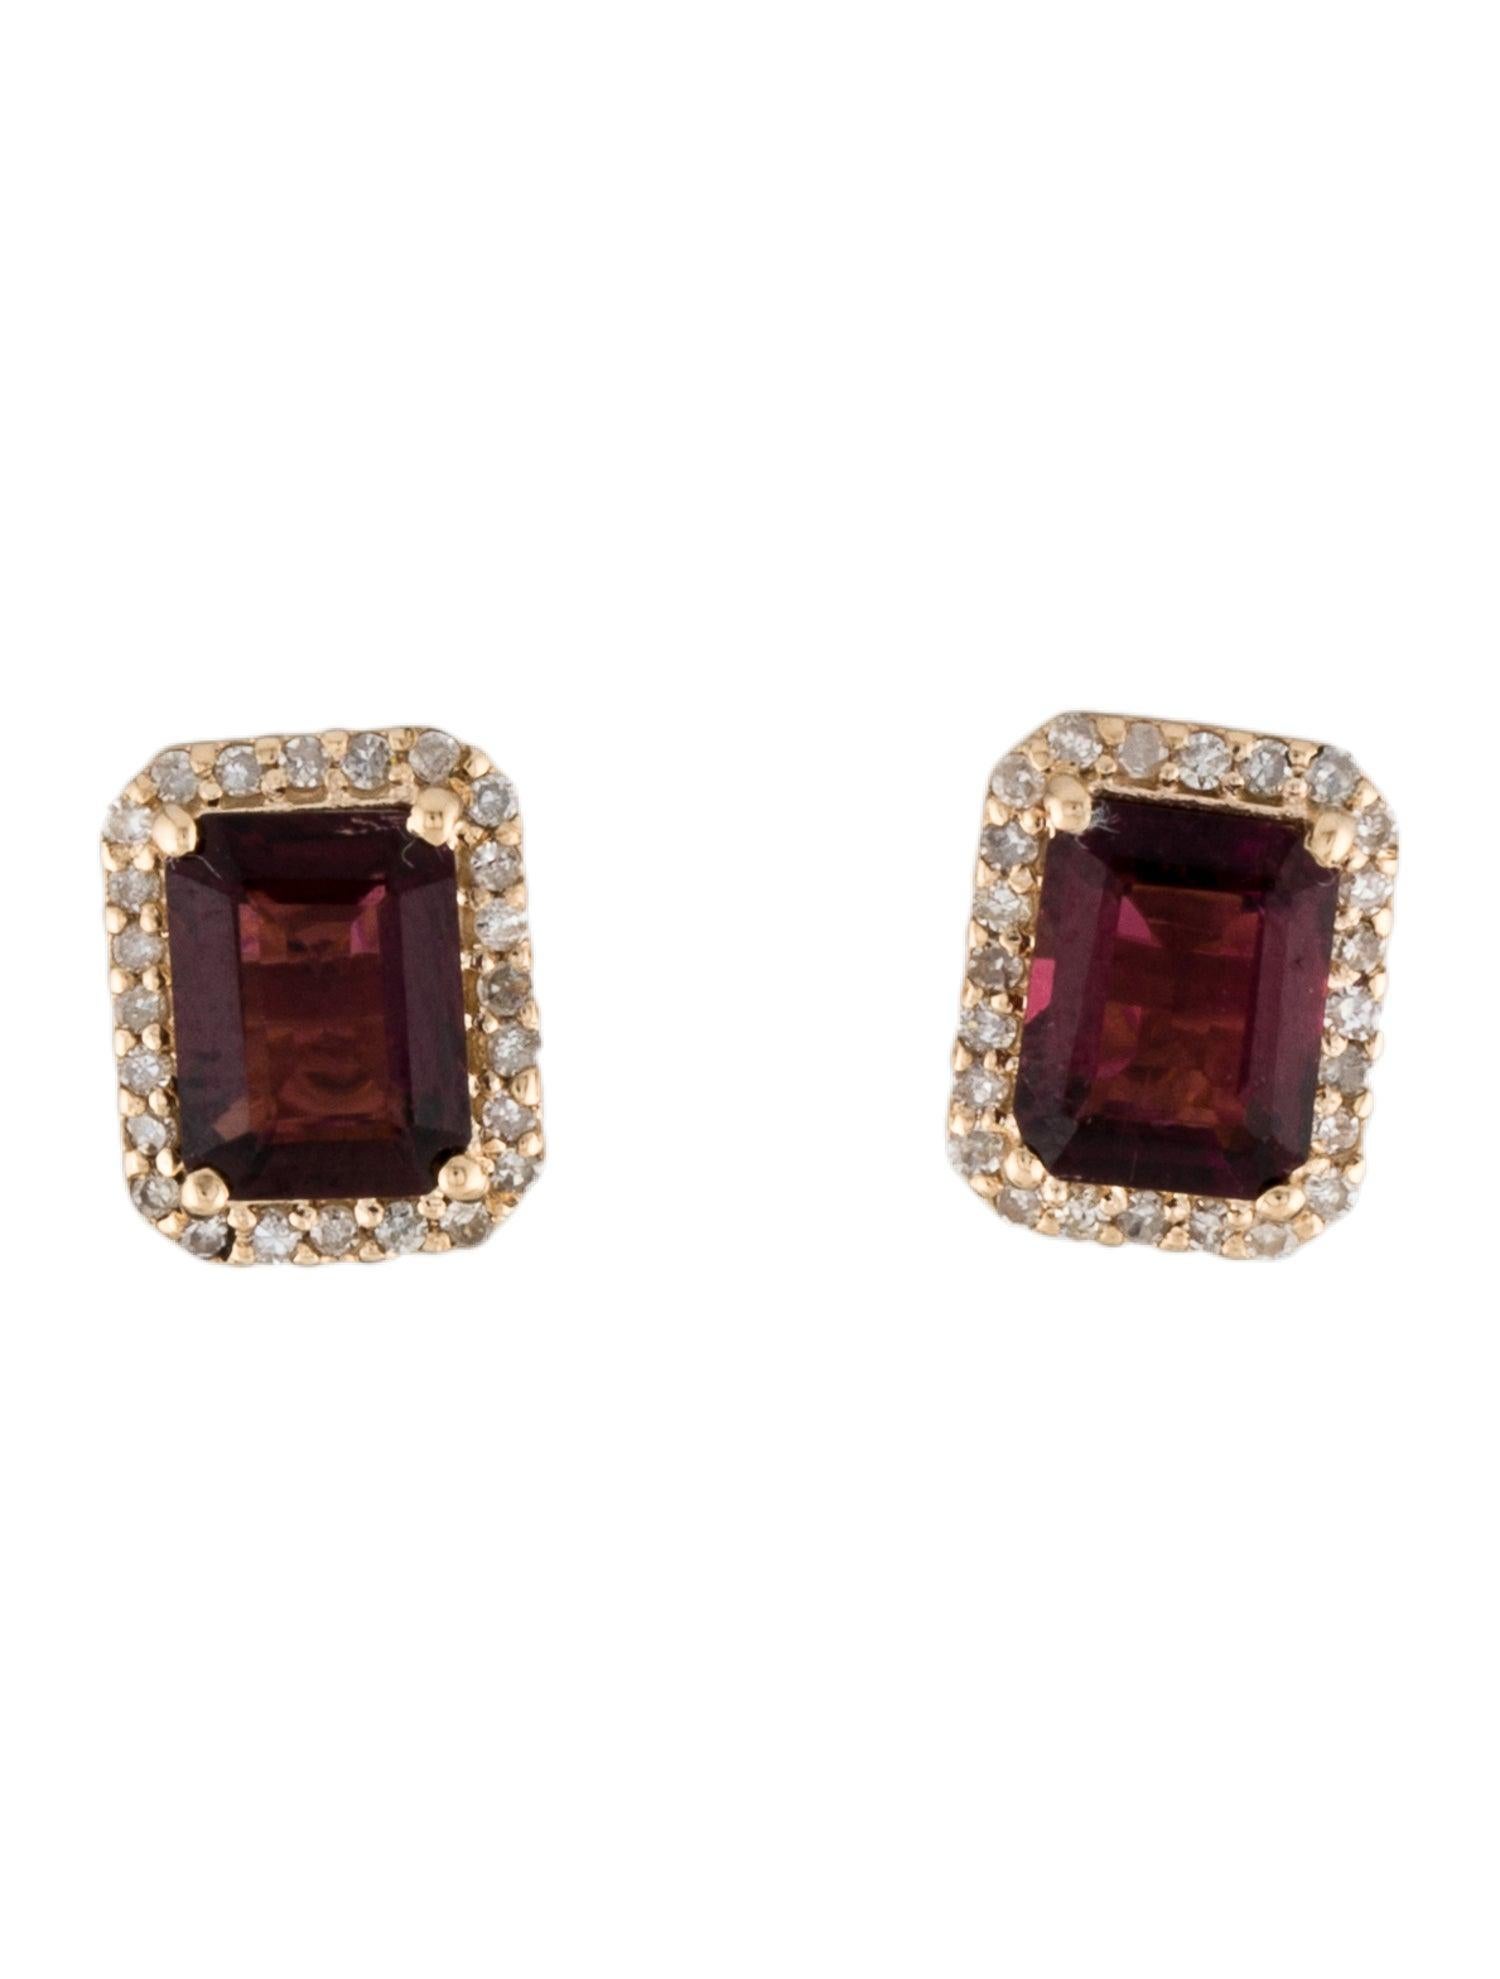 Unveil the essence of elegance with these stunning 14K Yellow Gold Stud Earrings, featuring an exquisite ensemble of 1.84 carats of cut cornered rectangular step cut Tourmaline. The tourmaline stones, radiating captivating hues of red and pink, are